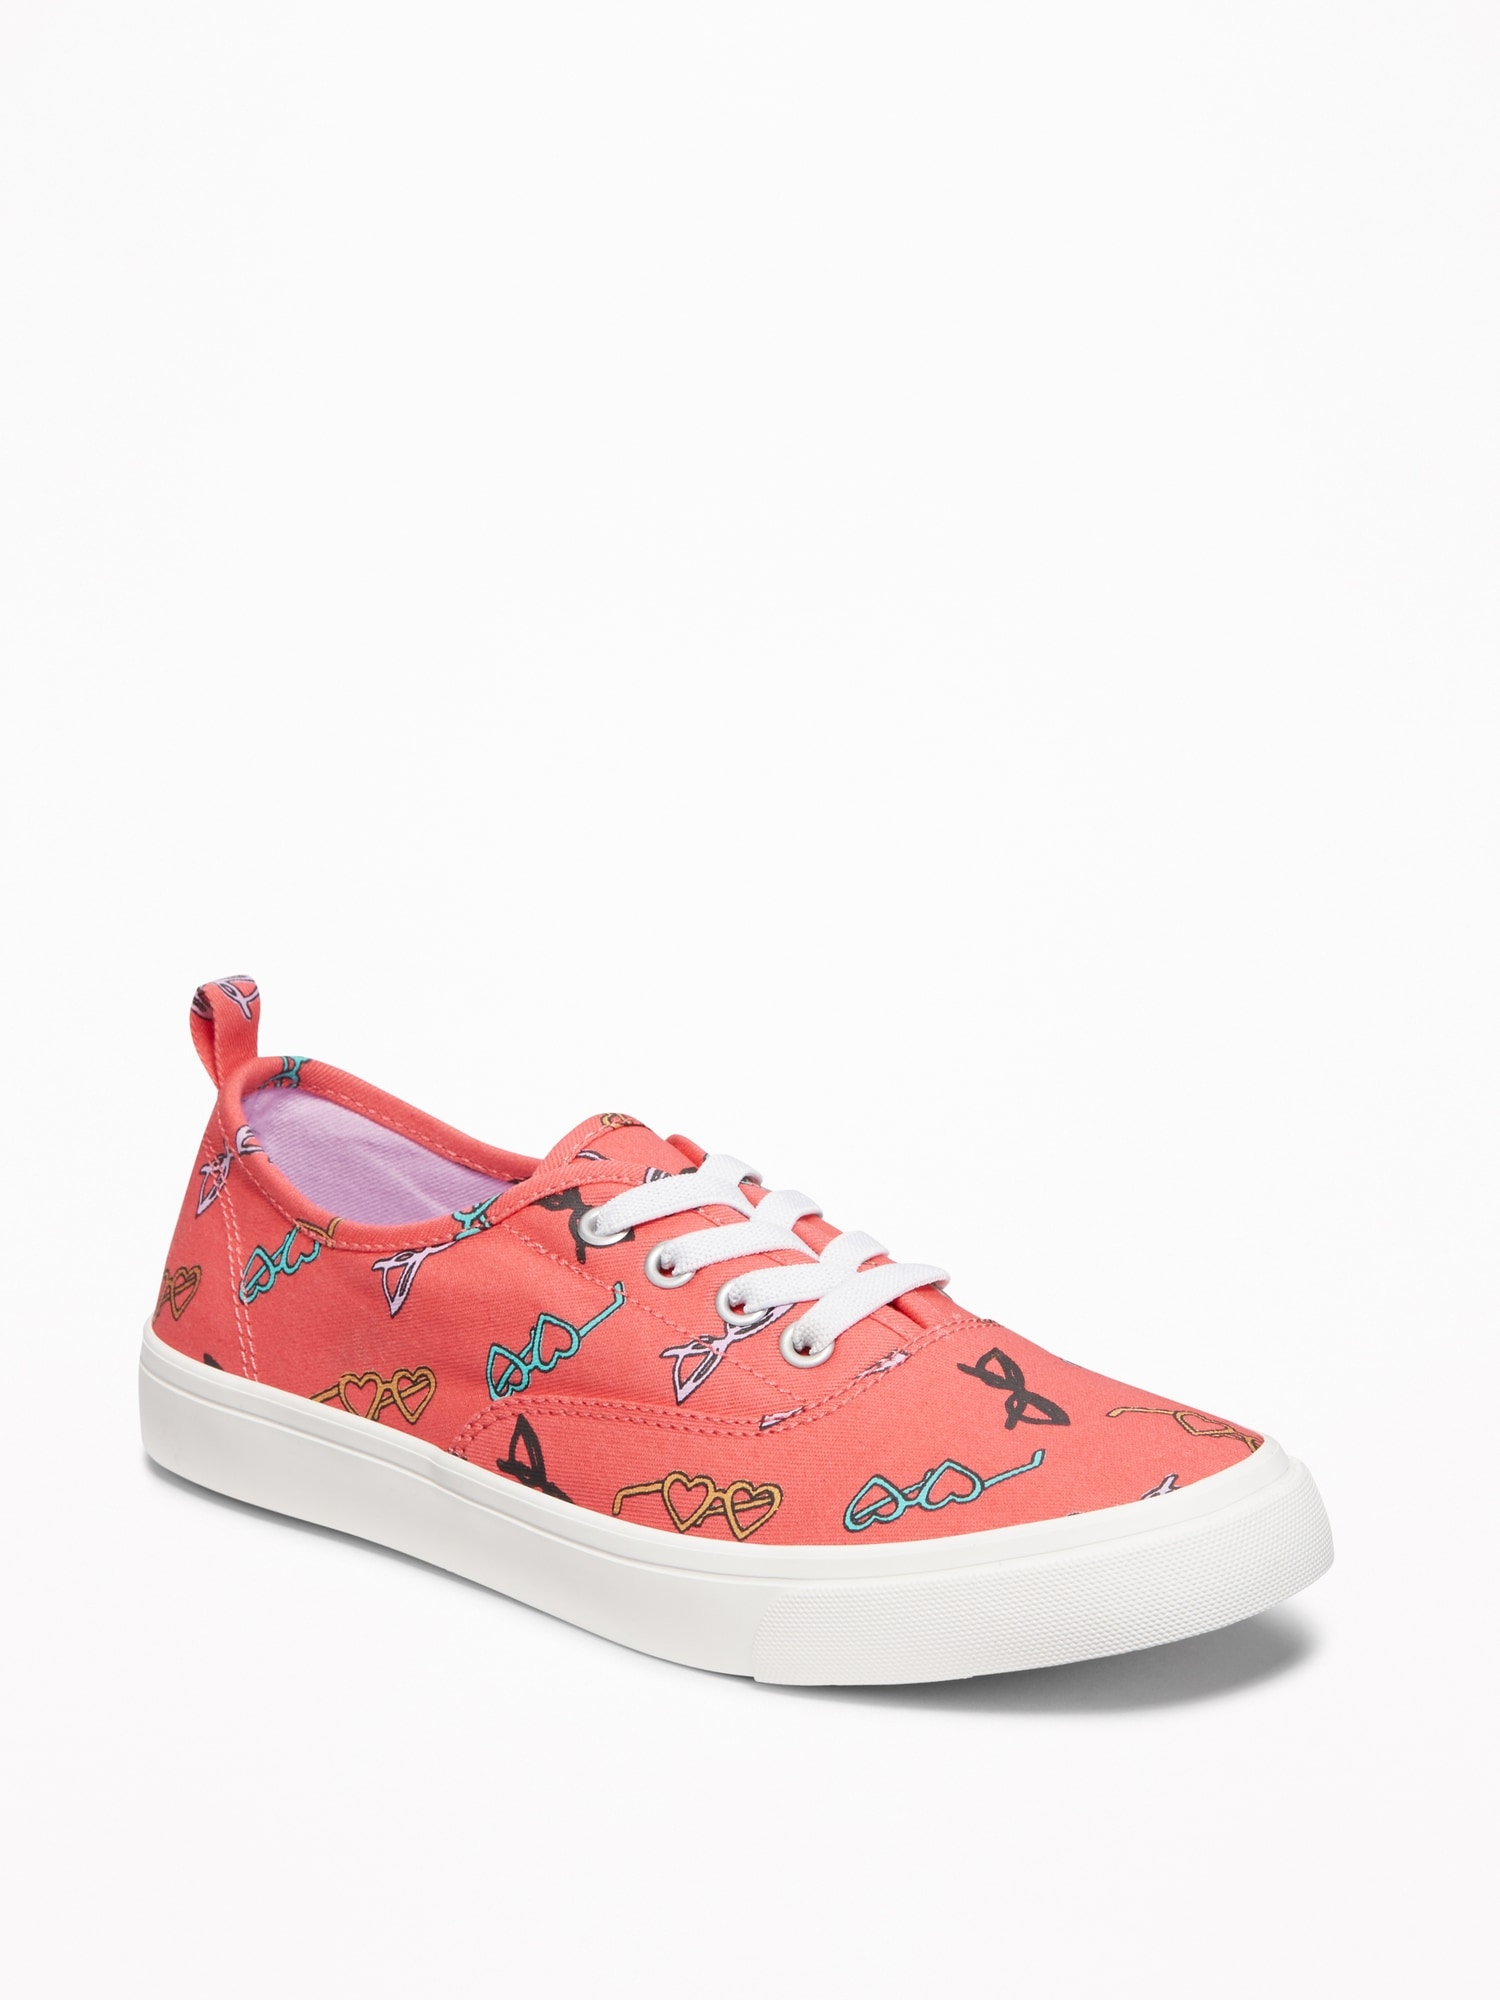 Eyeglass-Print Elastic-Lace Sneakers for Girls | Old Navy